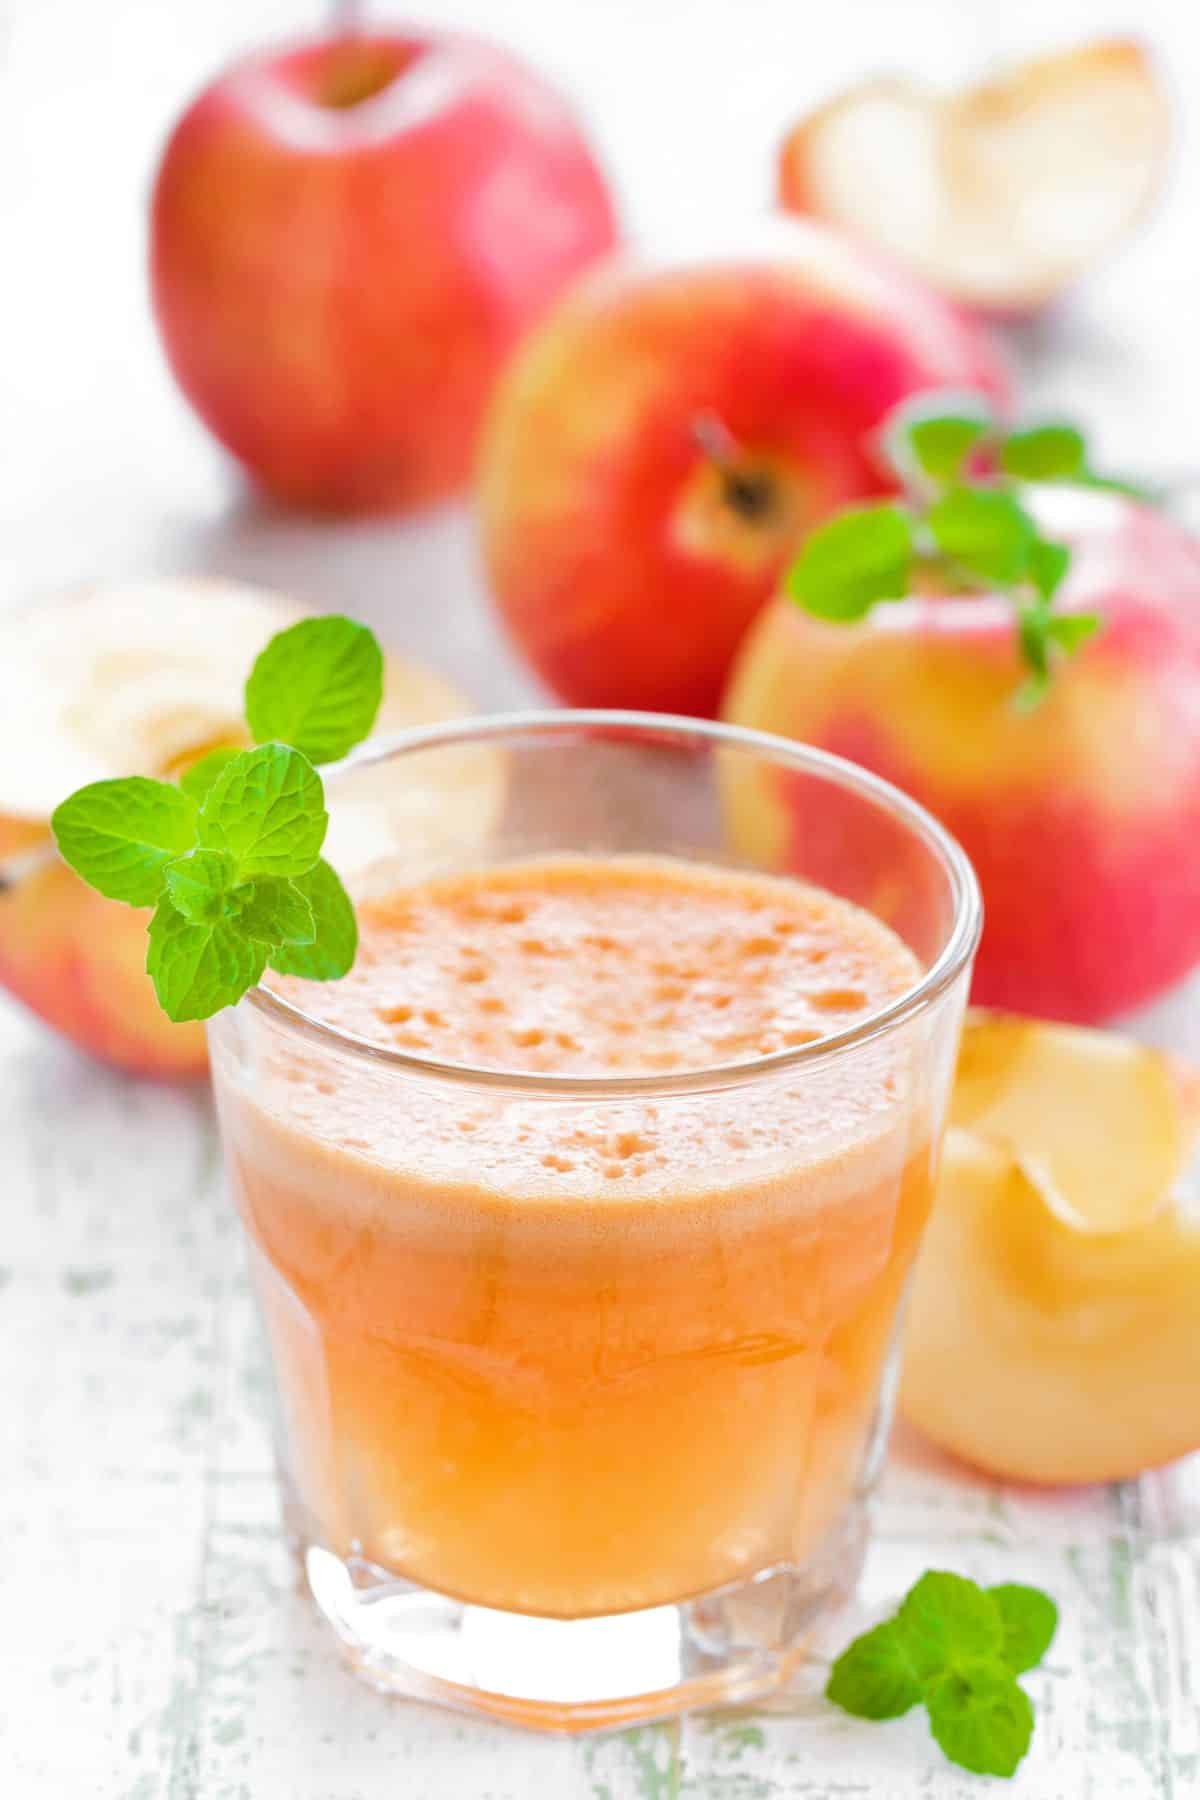 A short glass of freshly squeezed apple juice in front of whole apples.